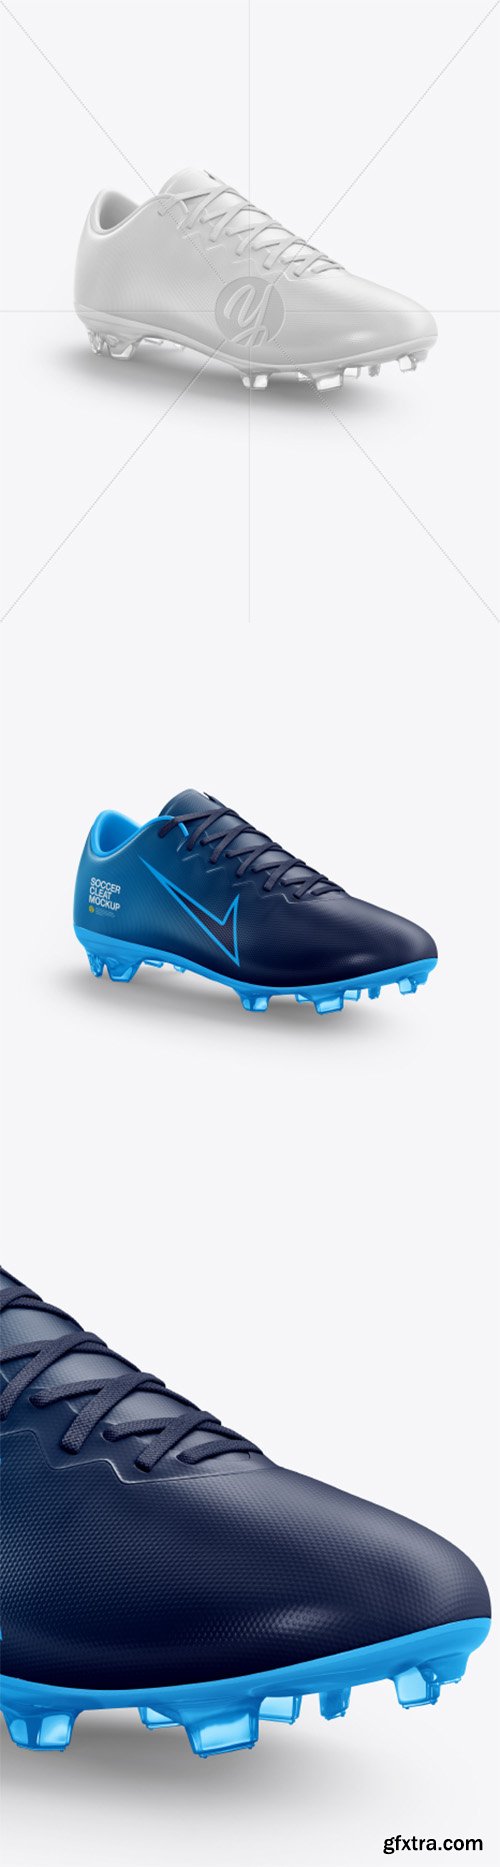 Soccer Cleat mockup (Half Side View) 39303